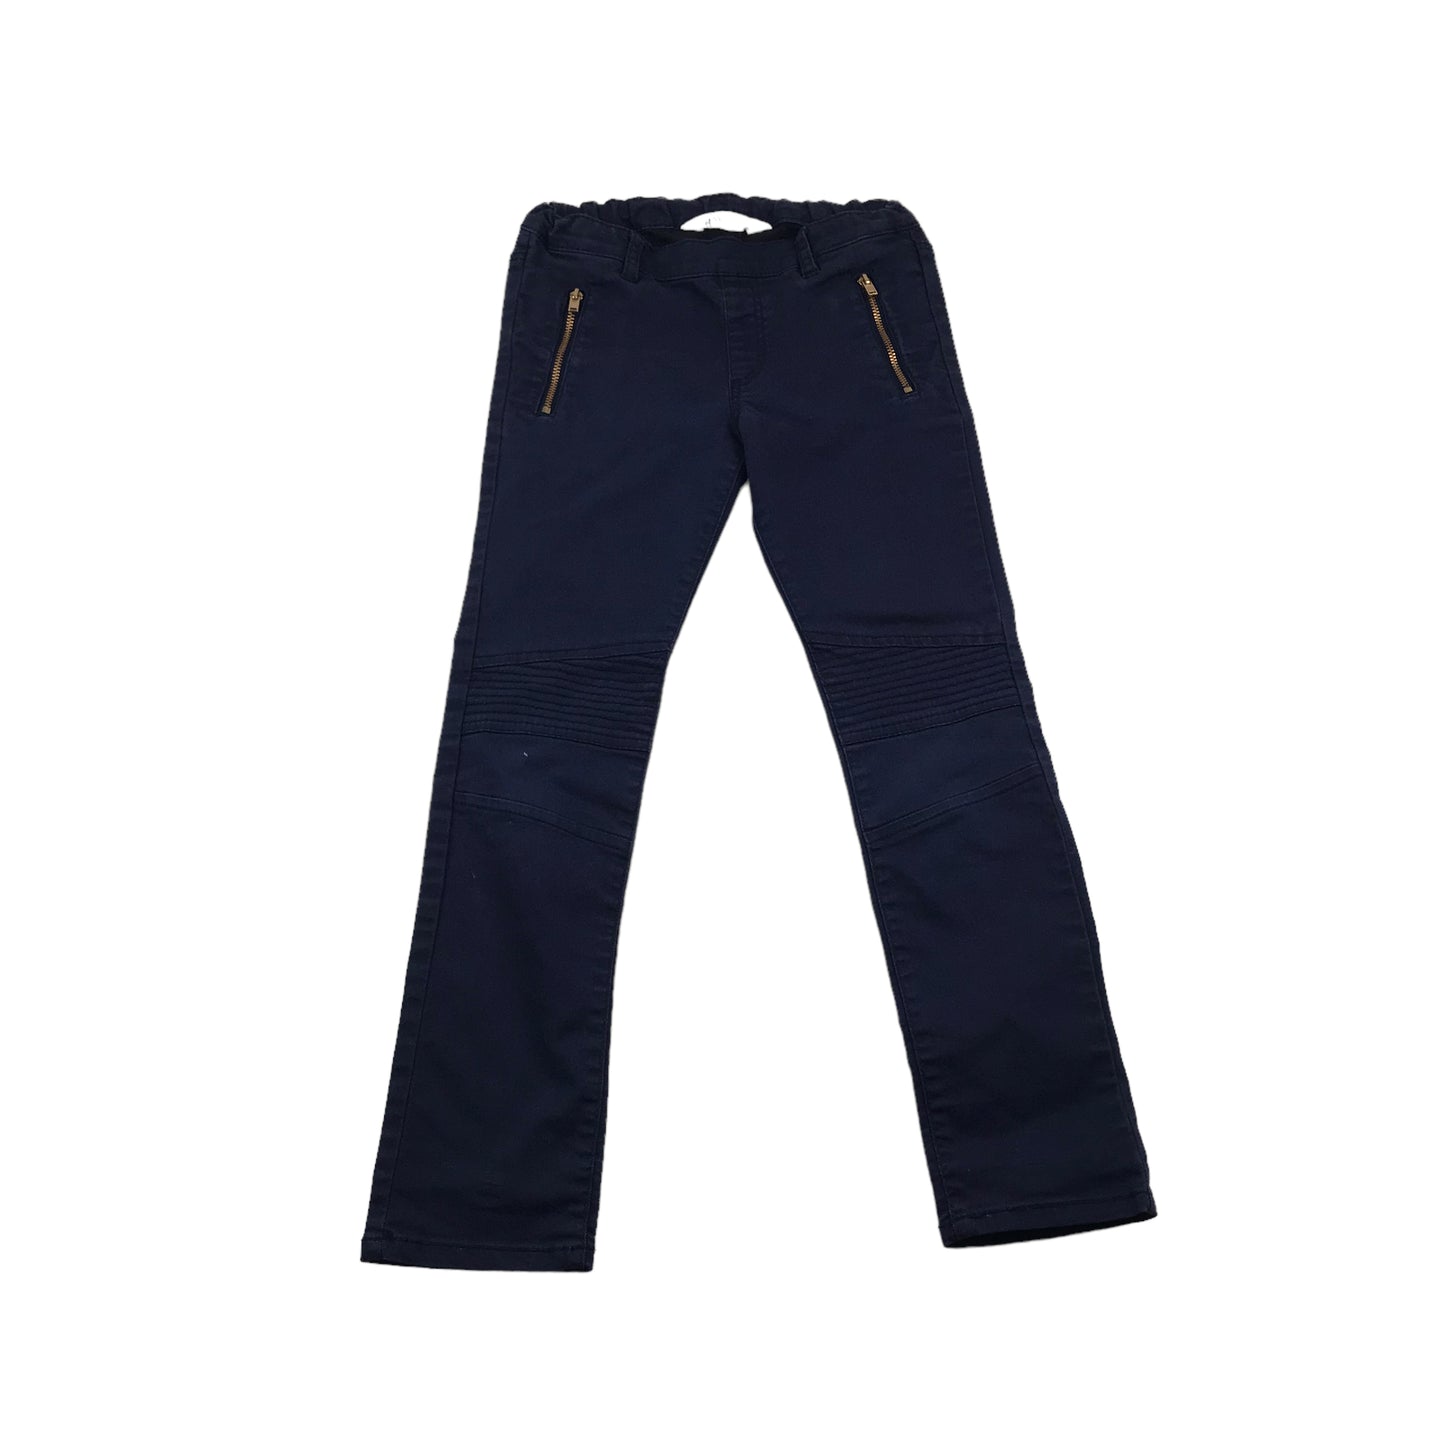 H&M Navy Blue Stretchy Trousers Age 6